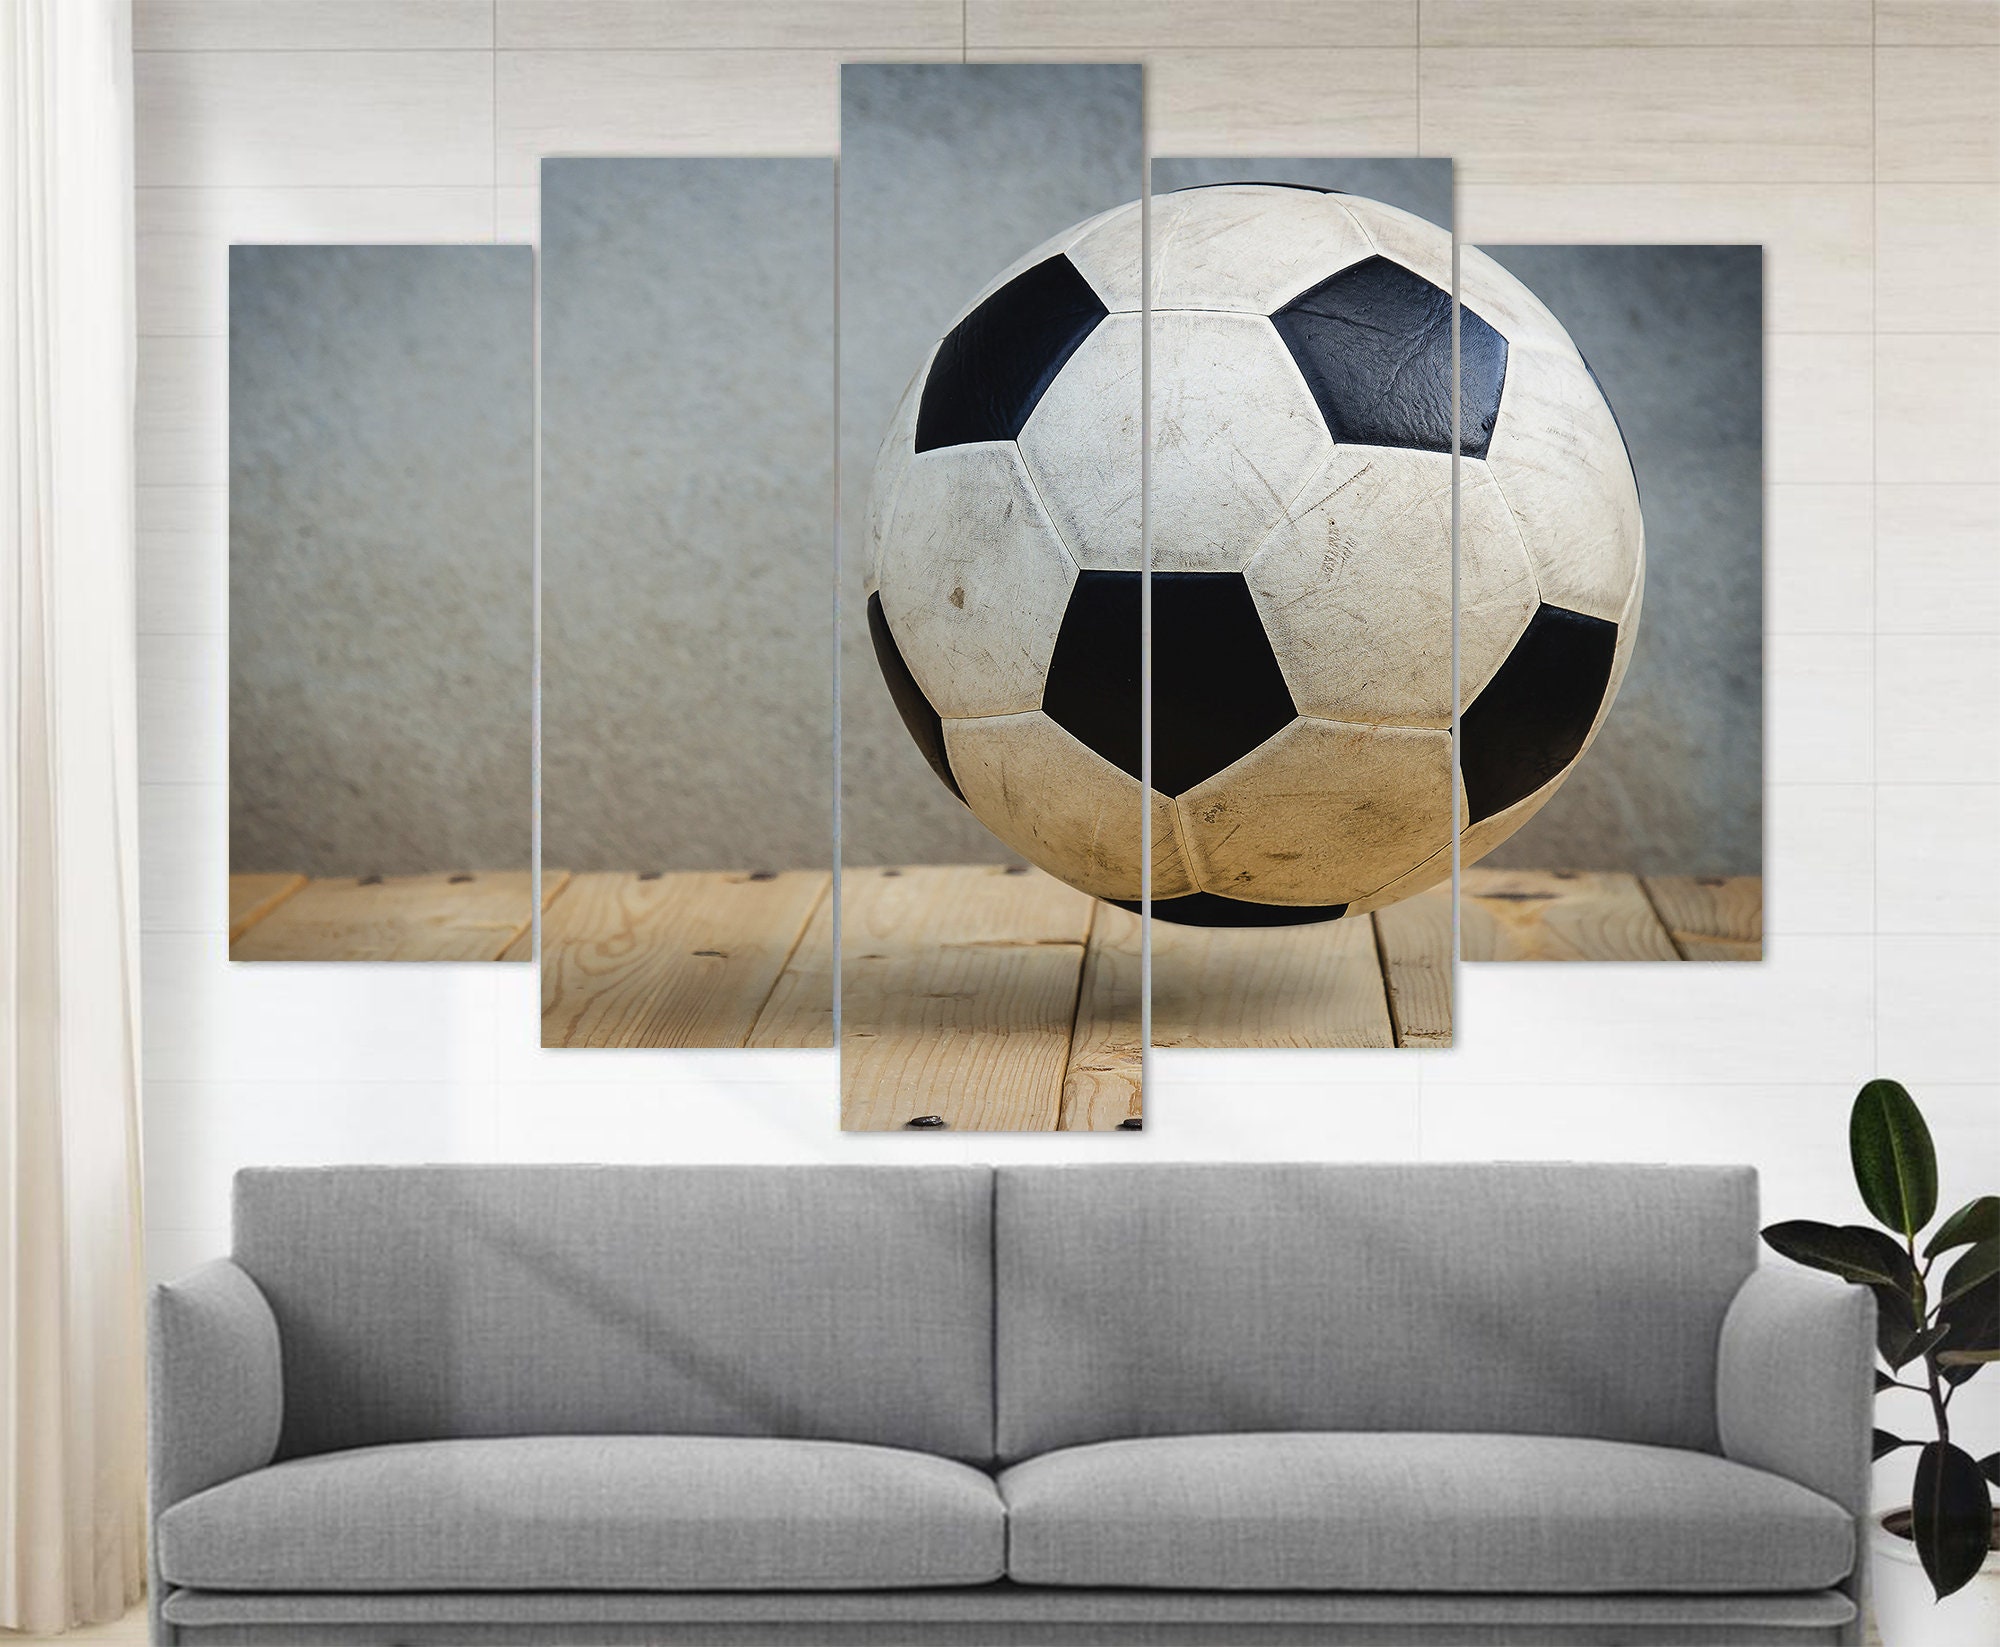 Abstract Soccer Canvas Art Soccer Ball Print Game Room | Etsy